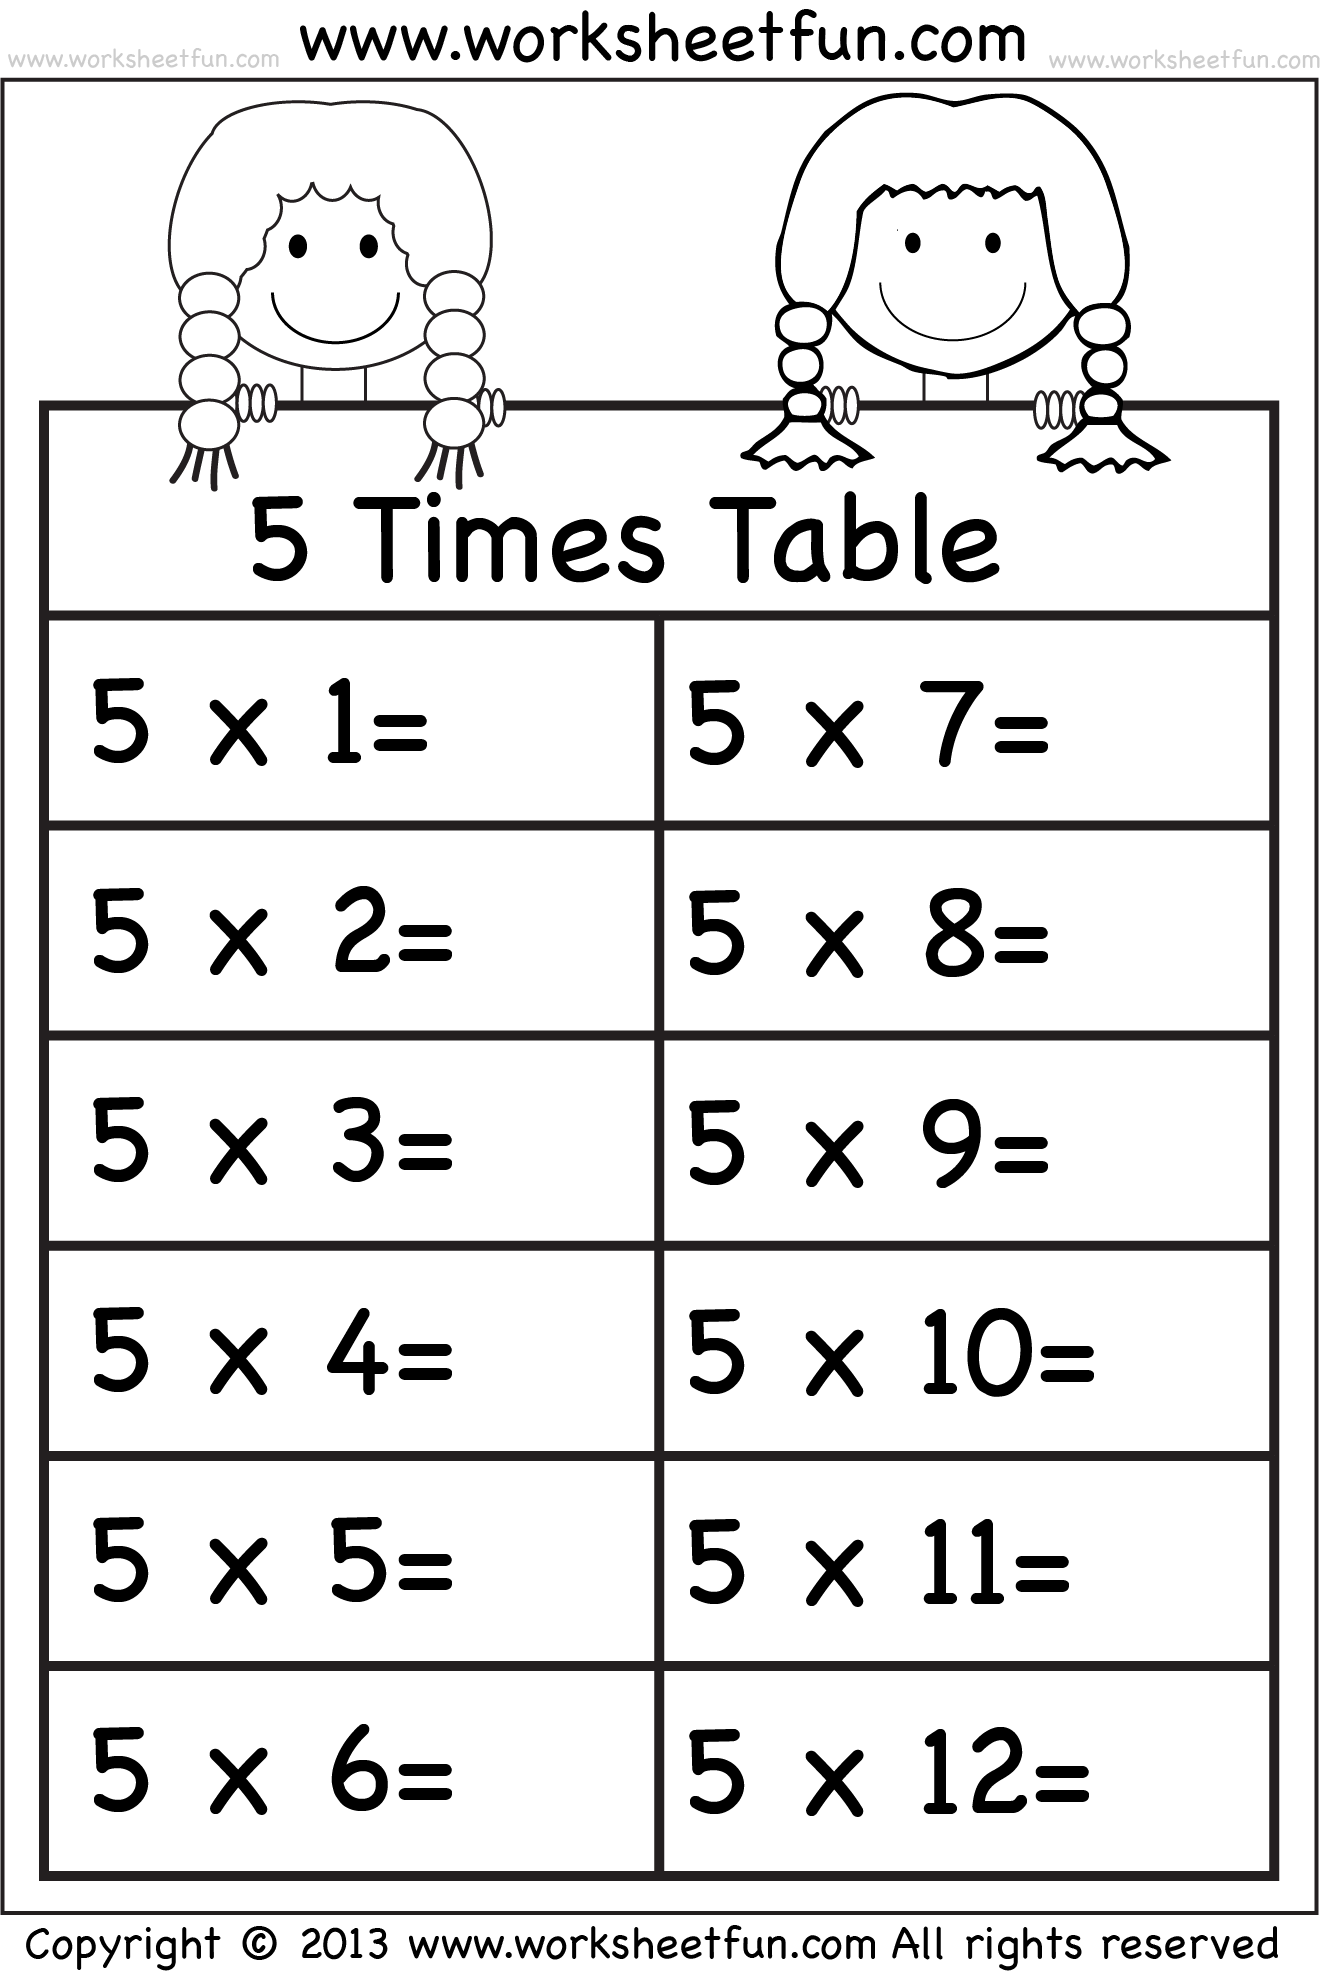 Times Tables Worksheets 2 3 4 5 6 7 8 9 10 11 And 12 Eleven Worksheets FREE Printable Worksheets Worksheetfun